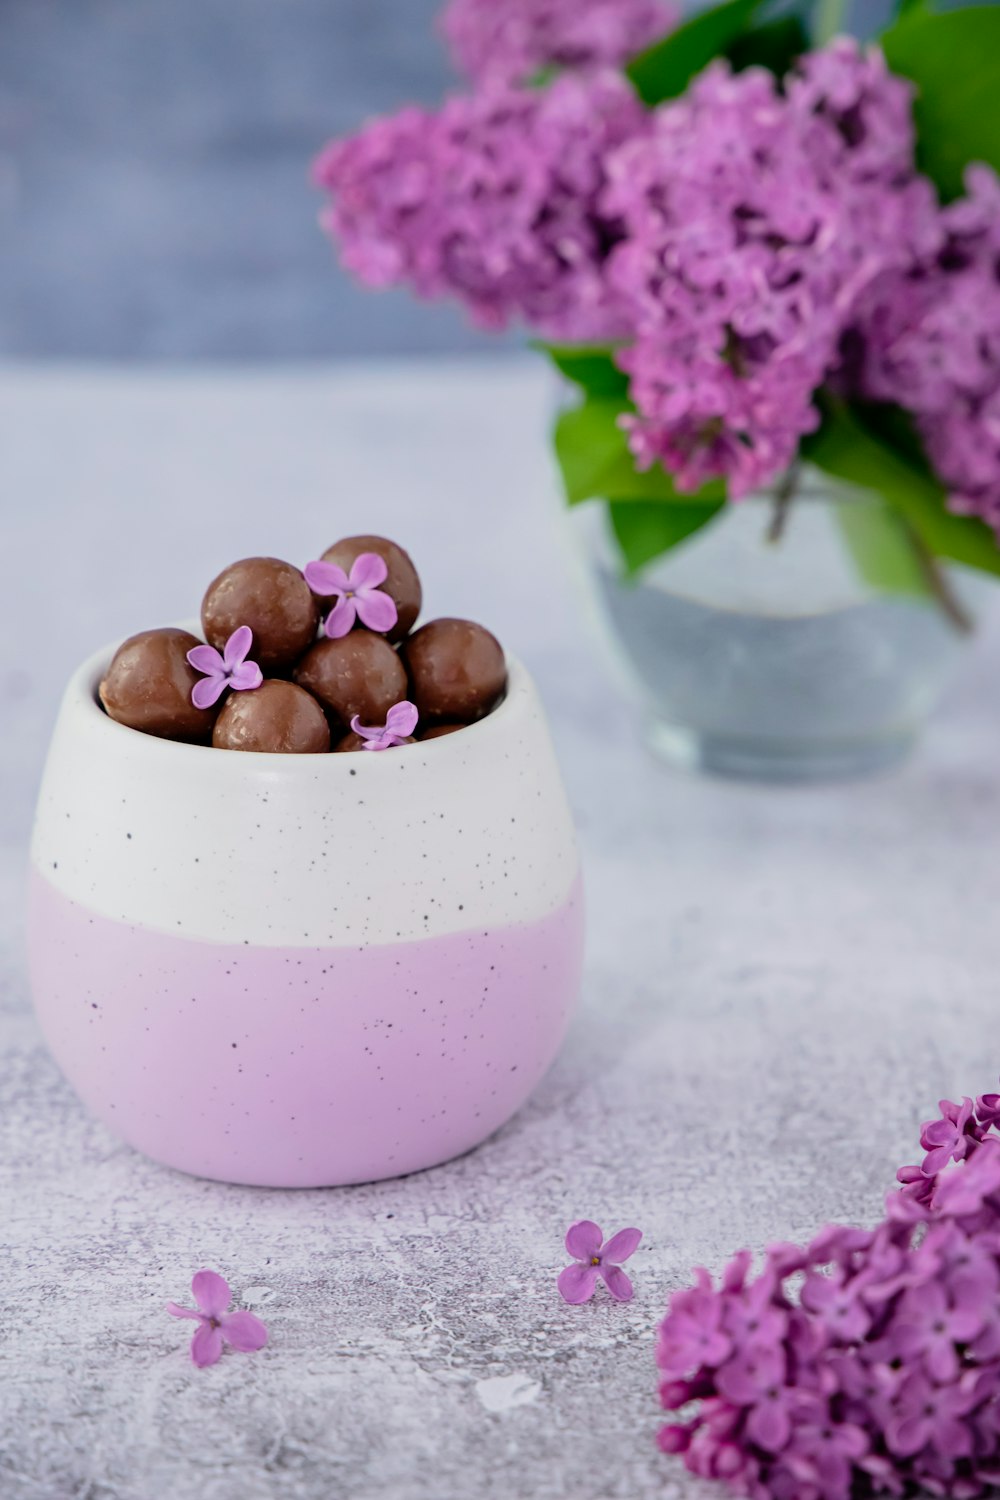 a white bowl filled with chocolates next to purple flowers